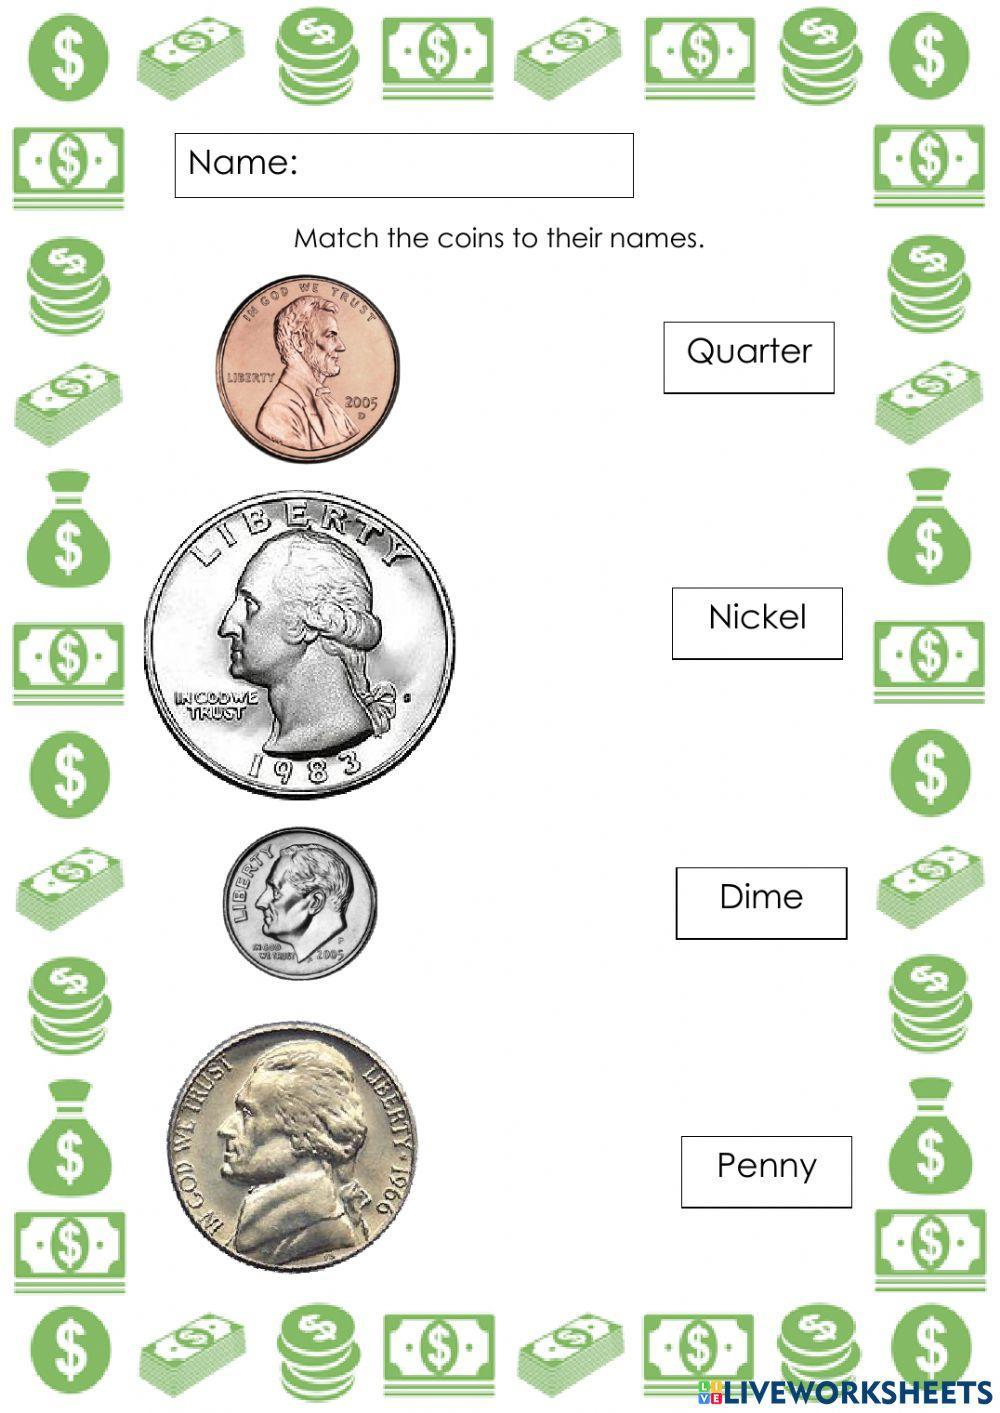 Match the coin to the name